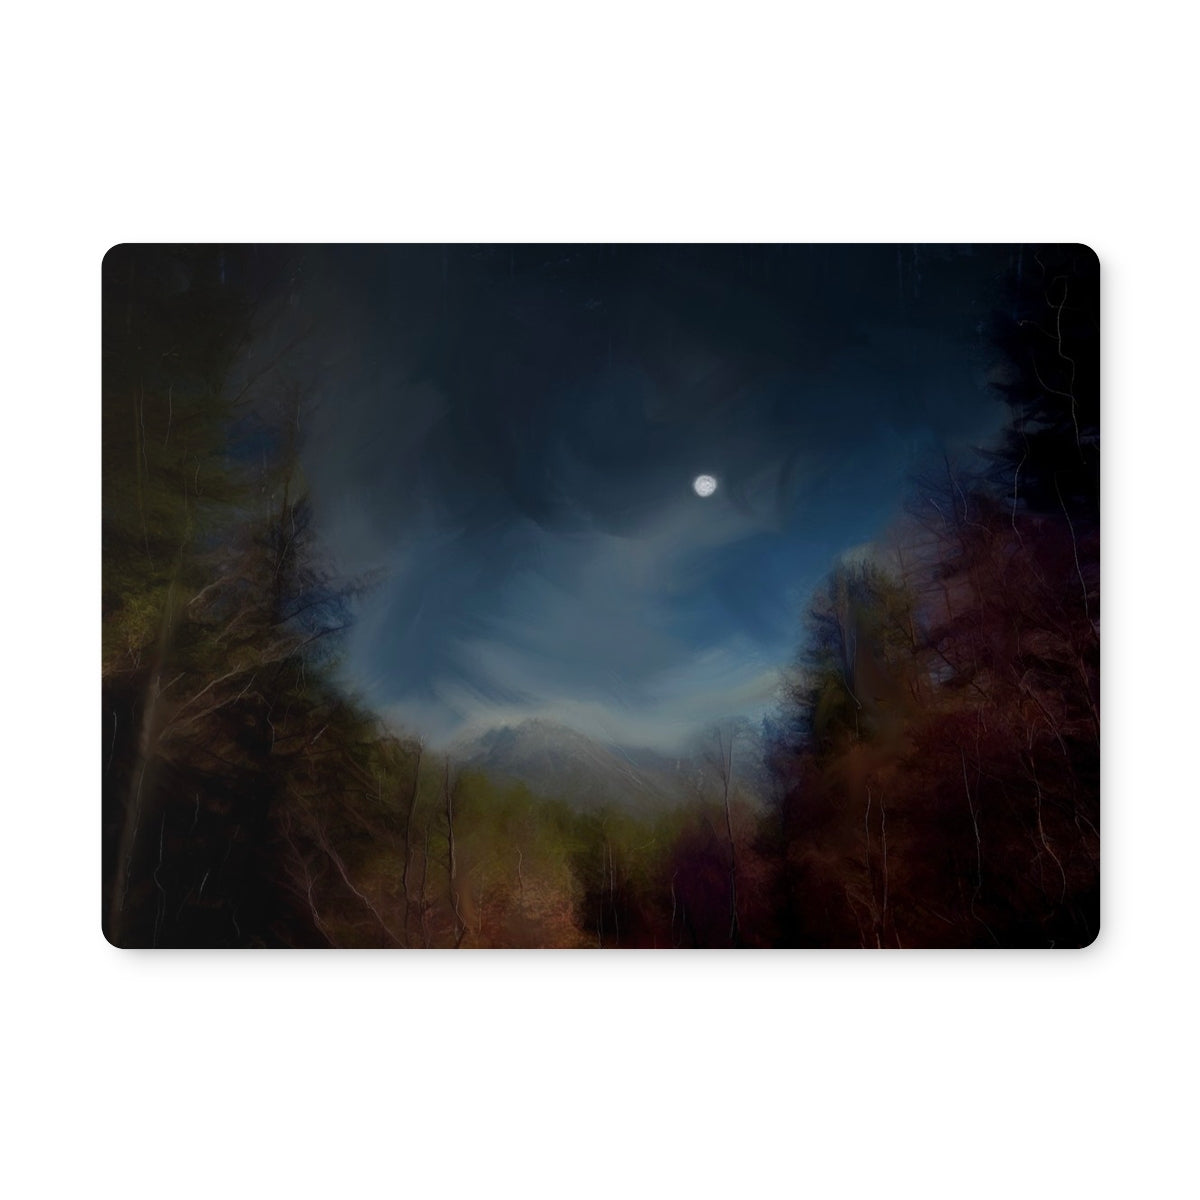 Glencoe Lochan Moonlight Art Gifts Placemat-Placemats-Scottish Lochs & Mountains Art Gallery-6 Placemats-Paintings, Prints, Homeware, Art Gifts From Scotland By Scottish Artist Kevin Hunter